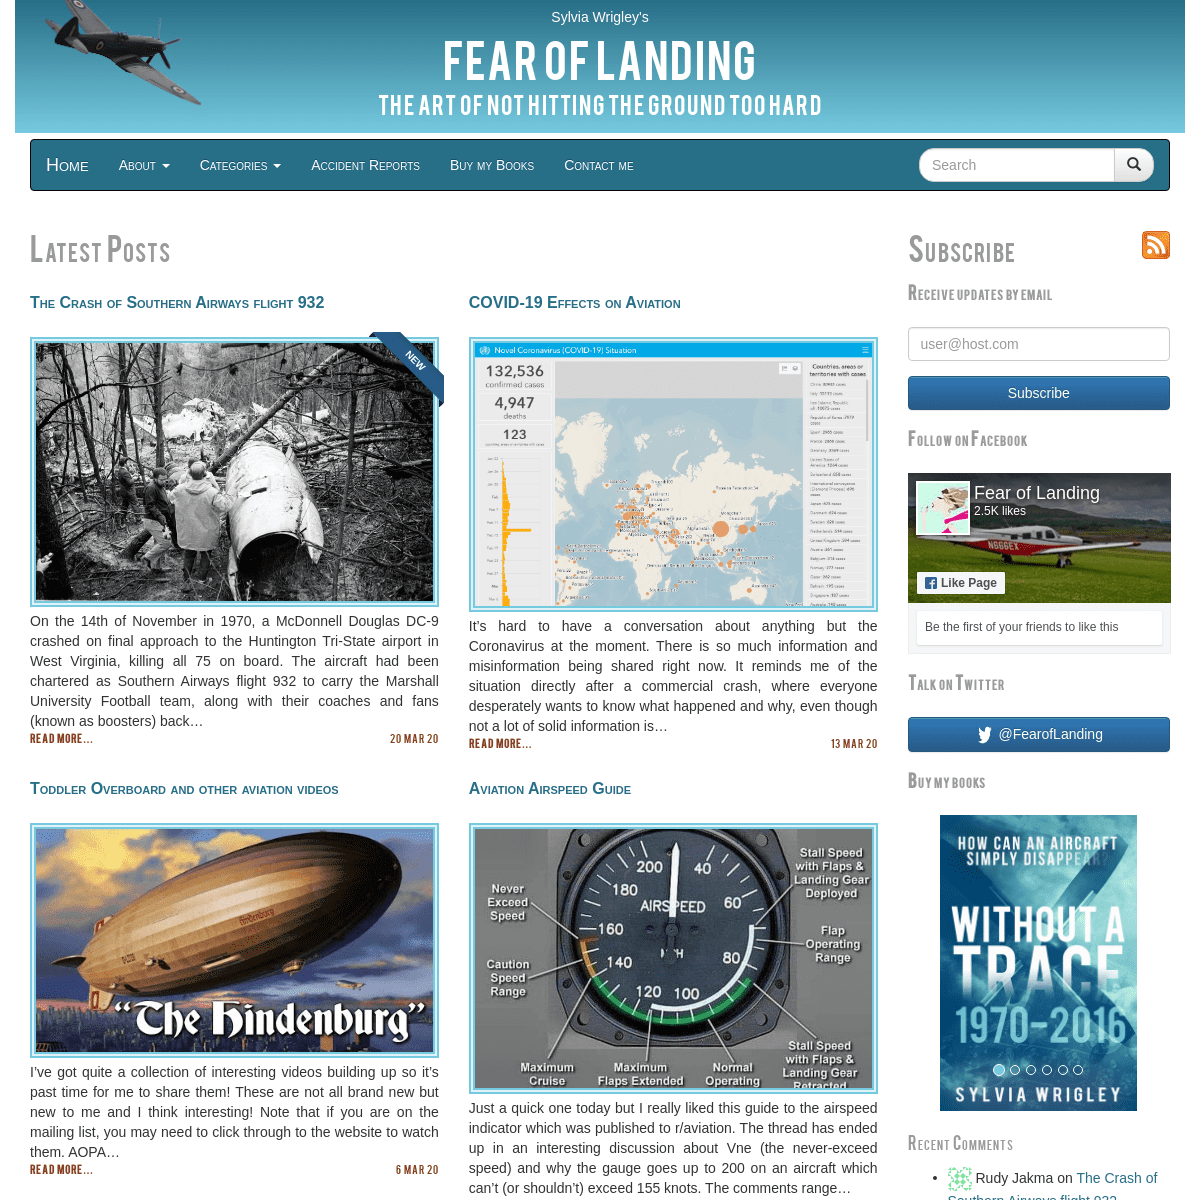 A complete backup of fearoflanding.com